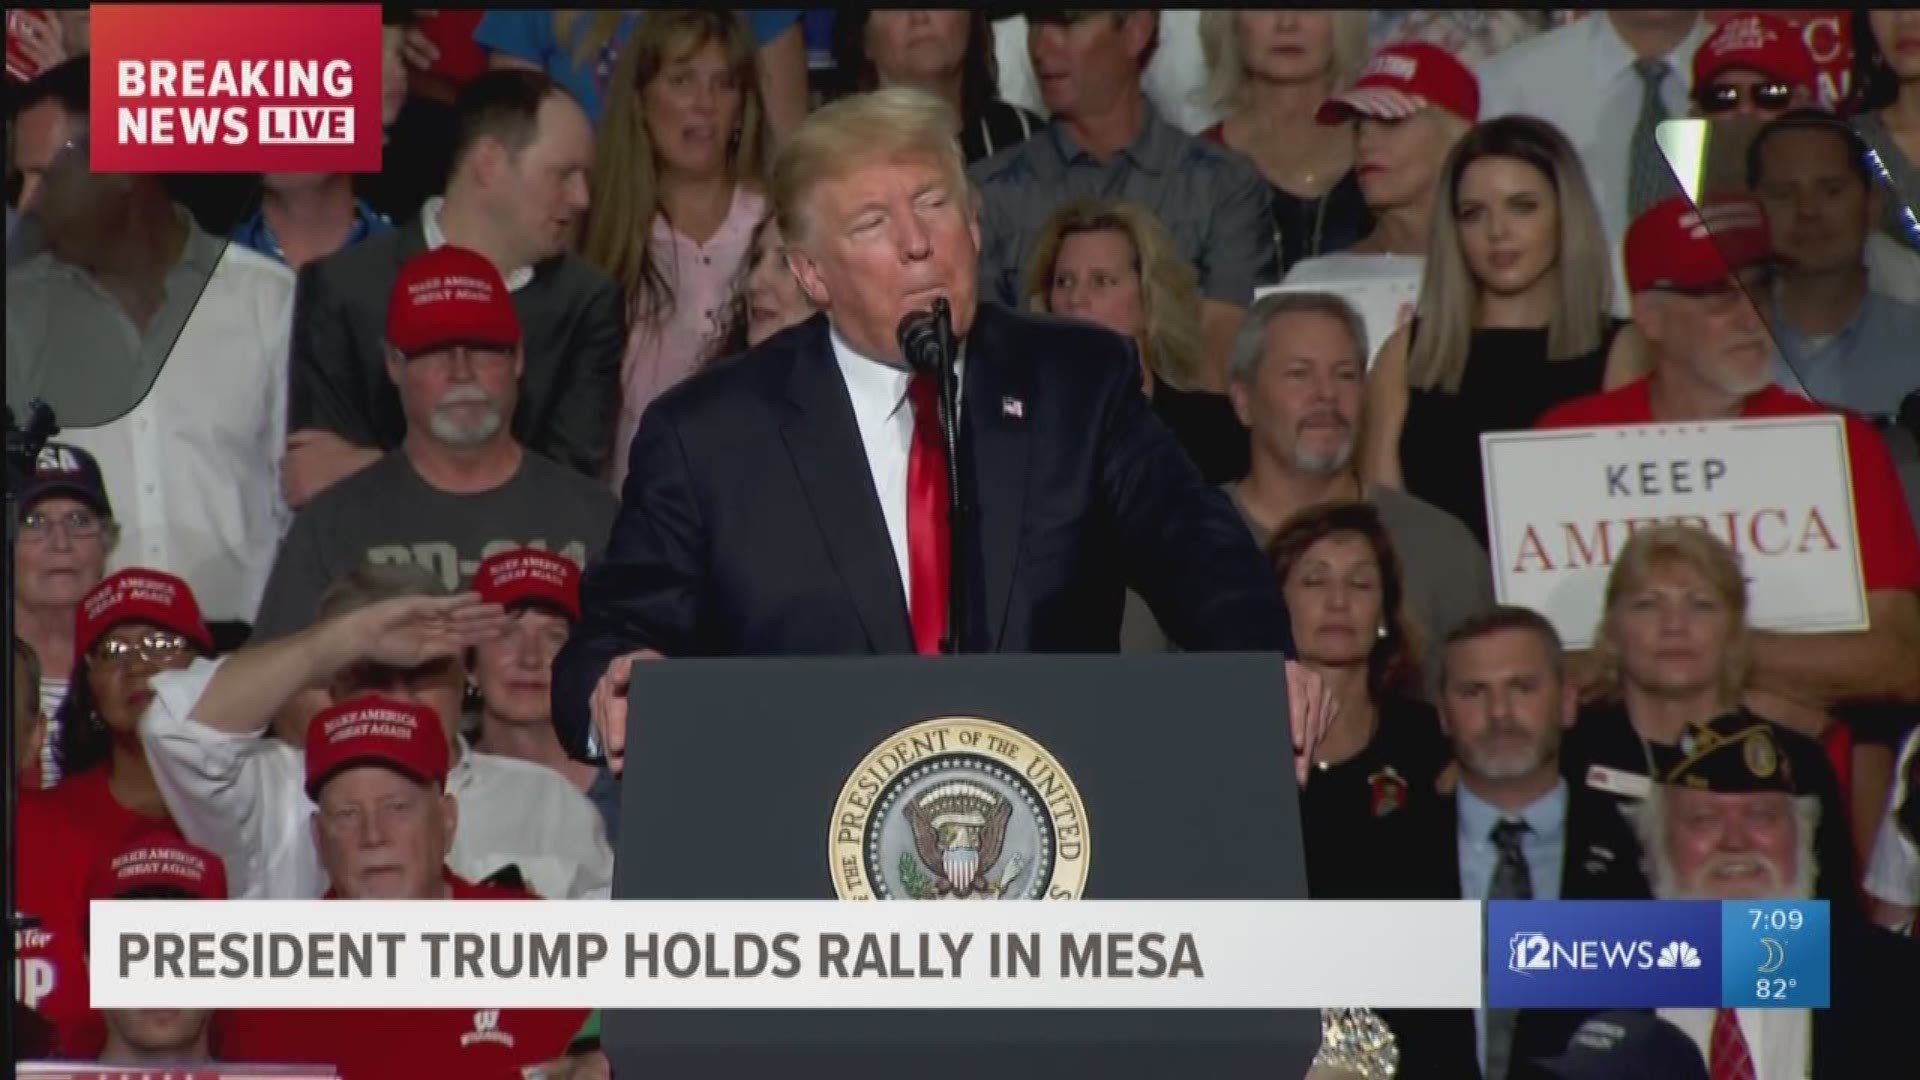 During a campaign rally for Republican Martha McSally President Trump criticized Democratic candidate Kyrsten Sinema's voting record. He says she does whatever Democratic leaders tell her to.